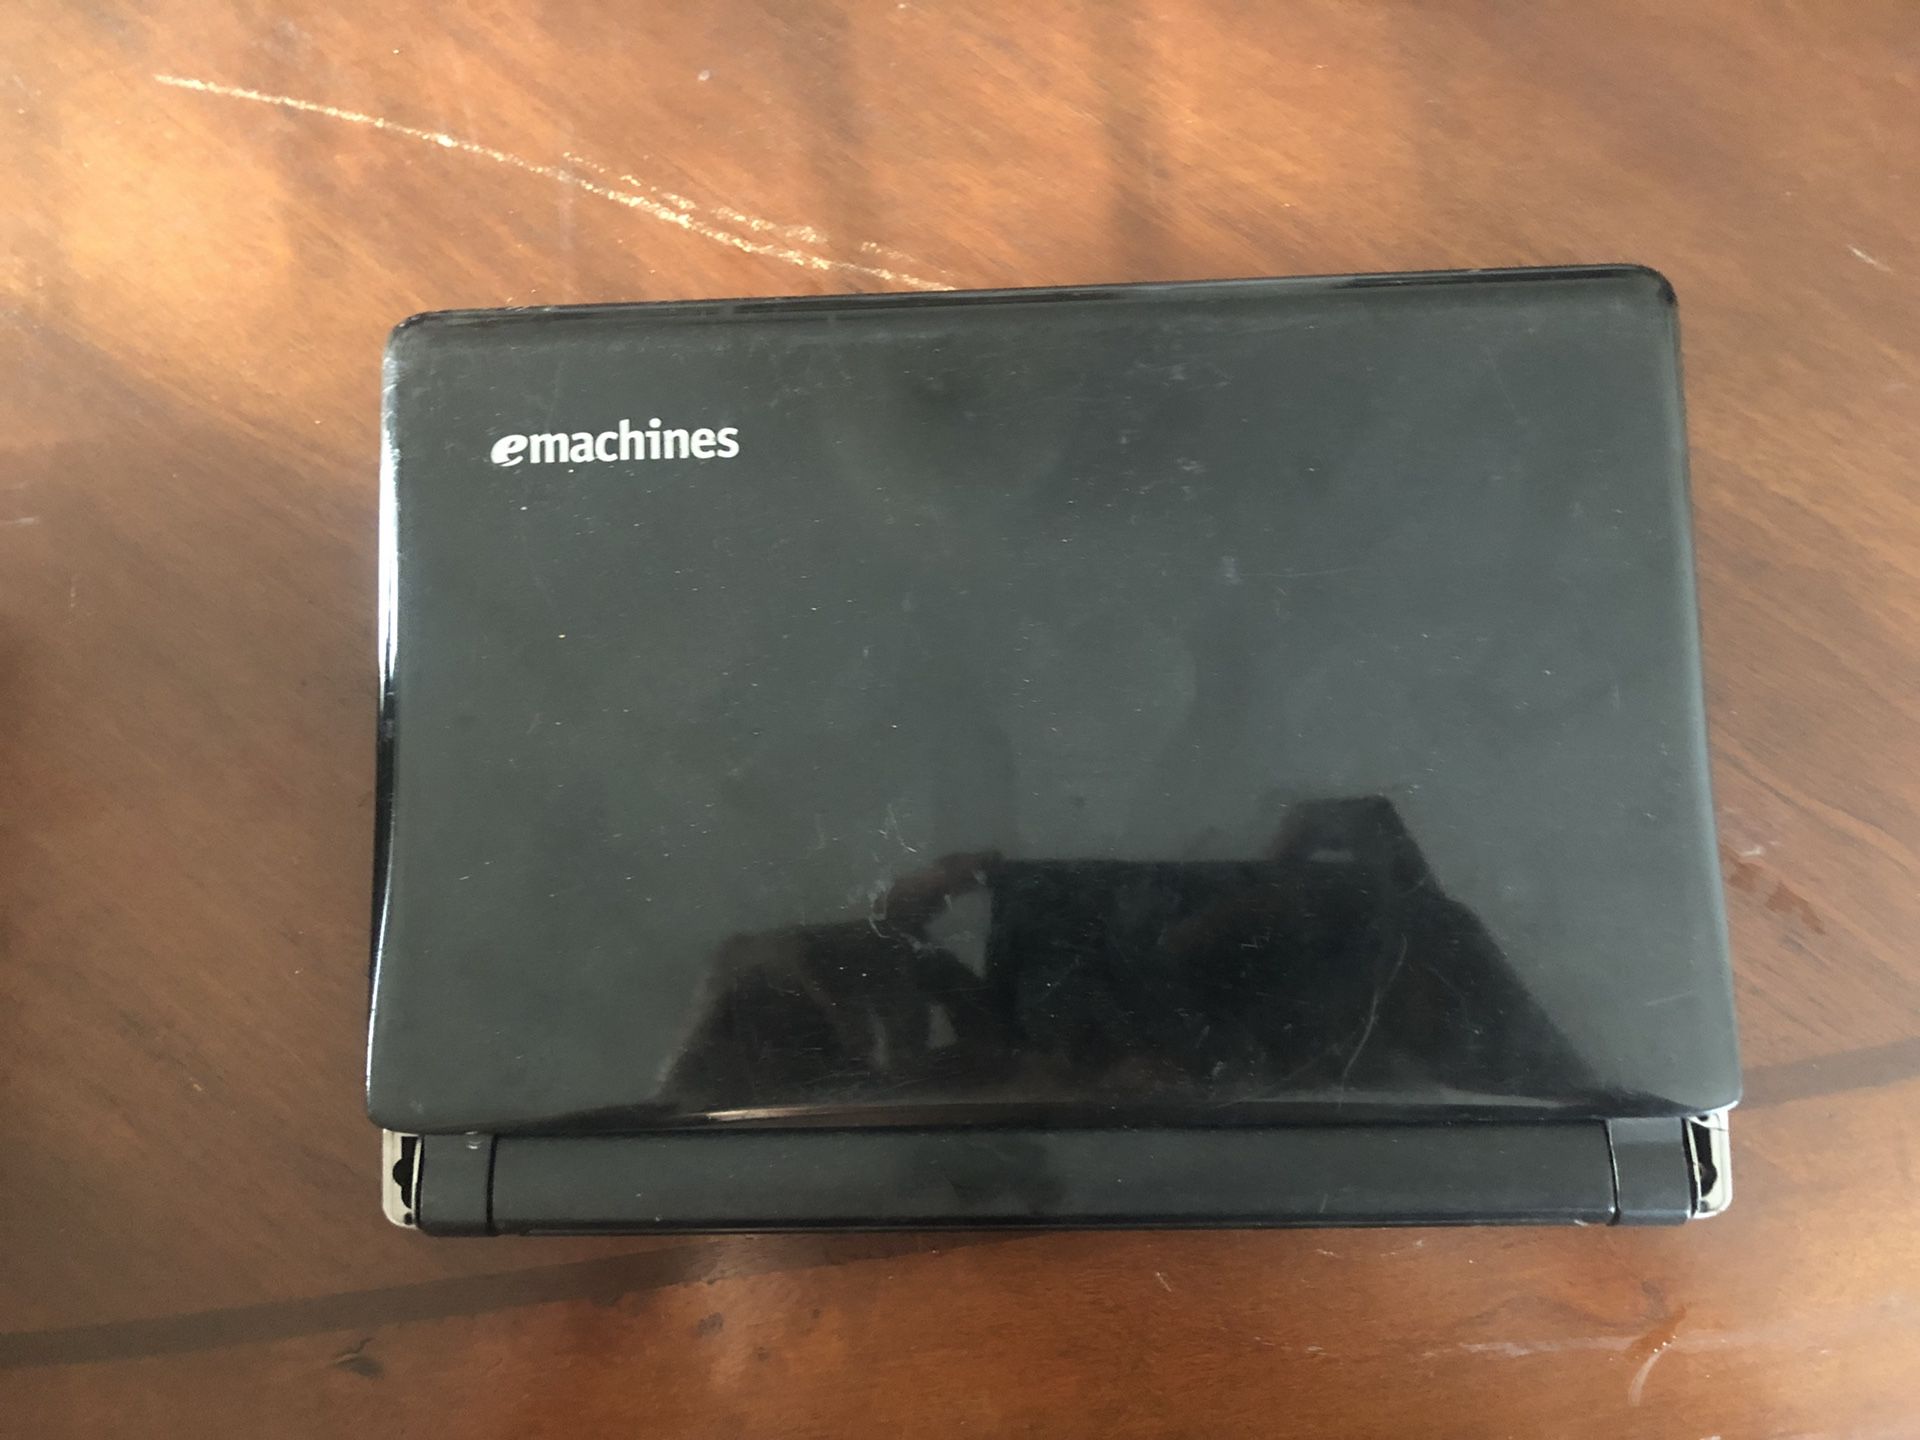 Emachines small laptop